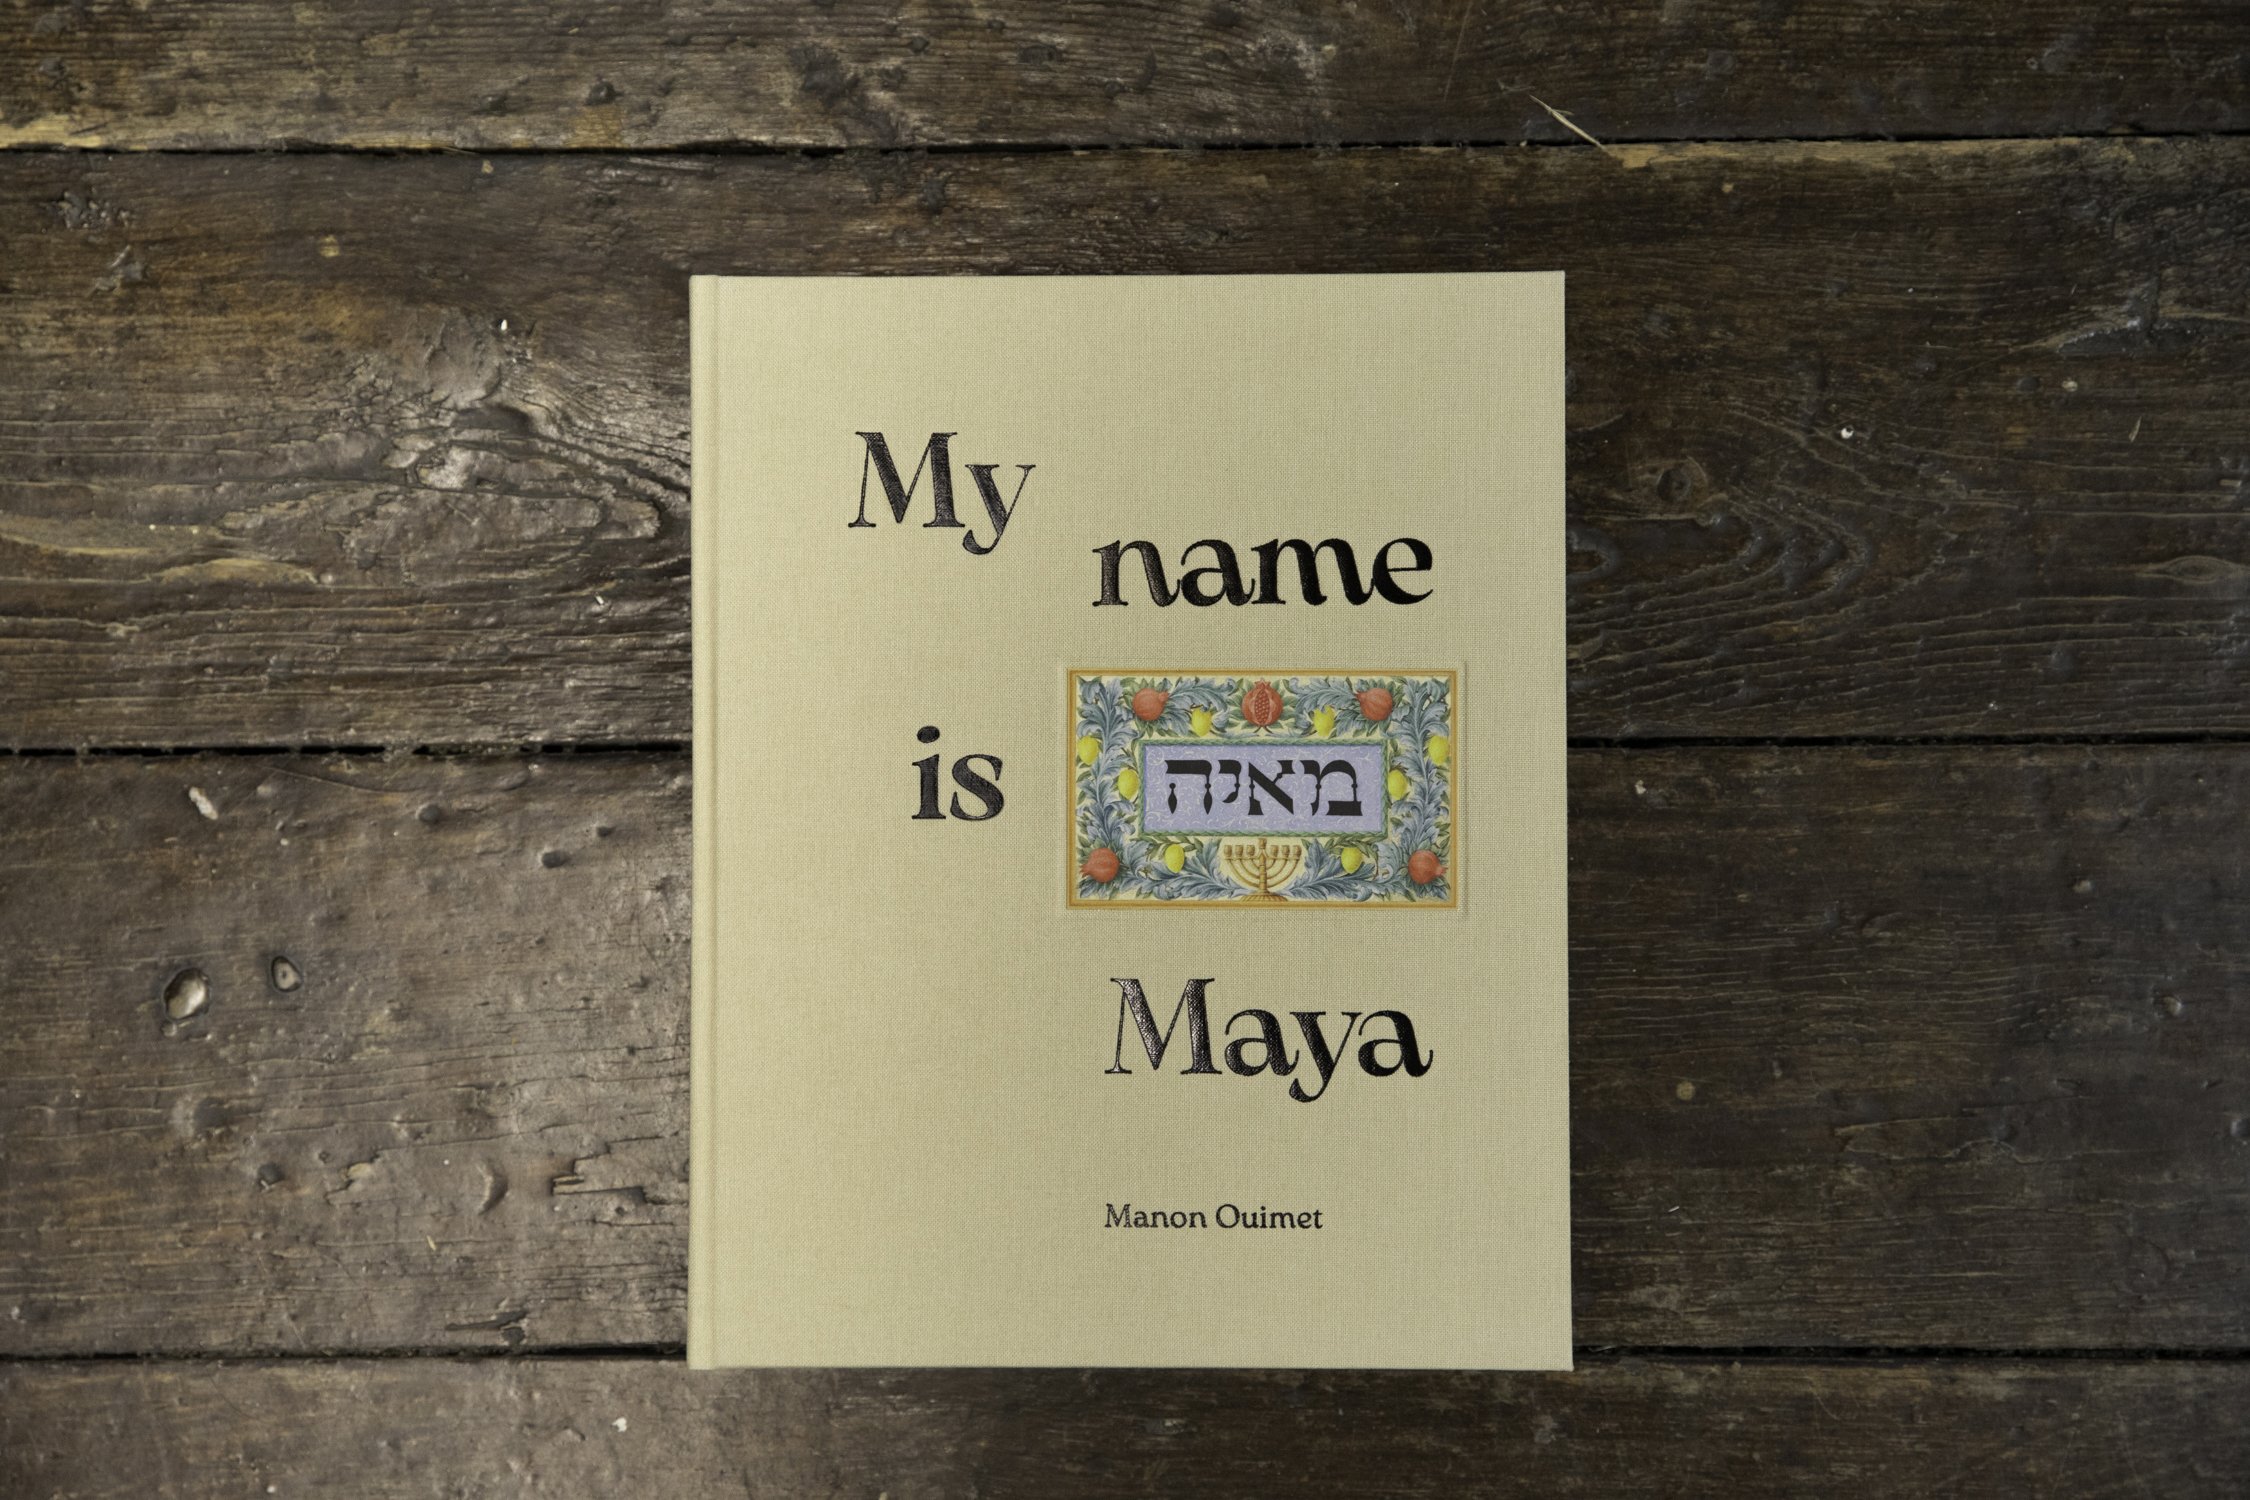 My name is Maya, edition of 25